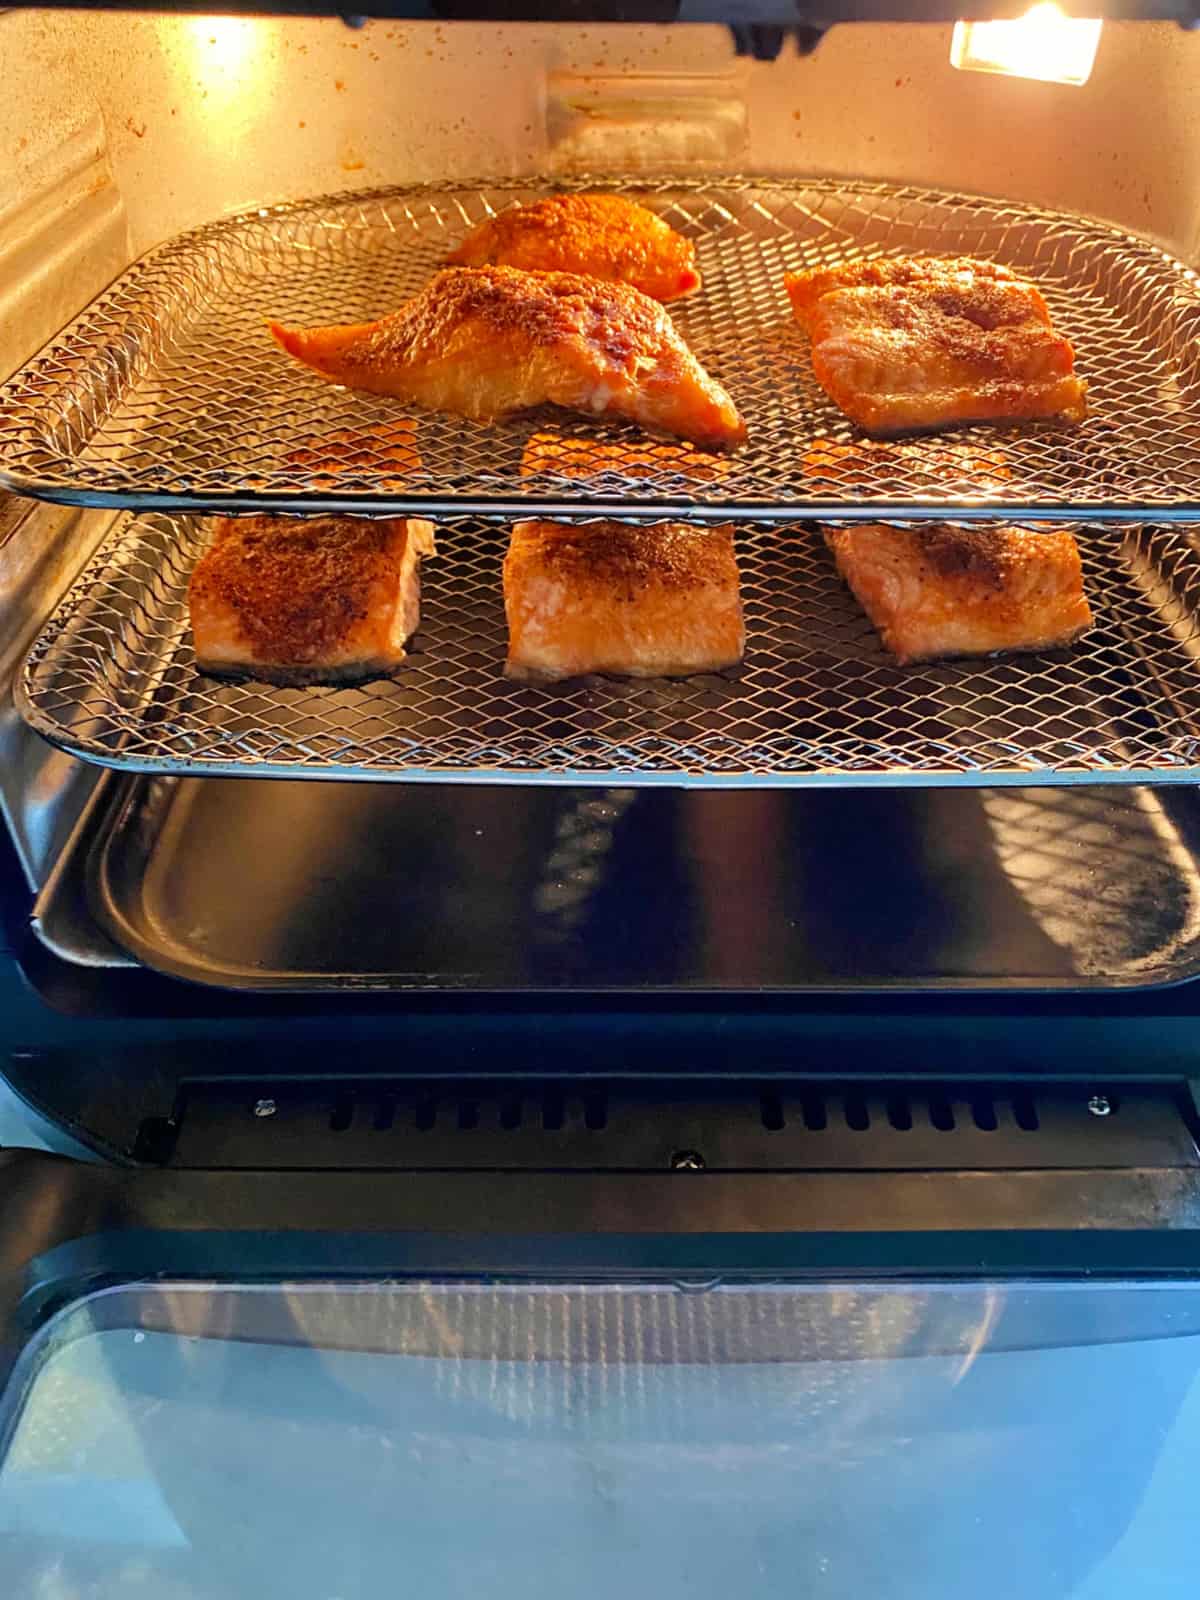 Two mesh trays in an air fryer with salmon filets on trays.